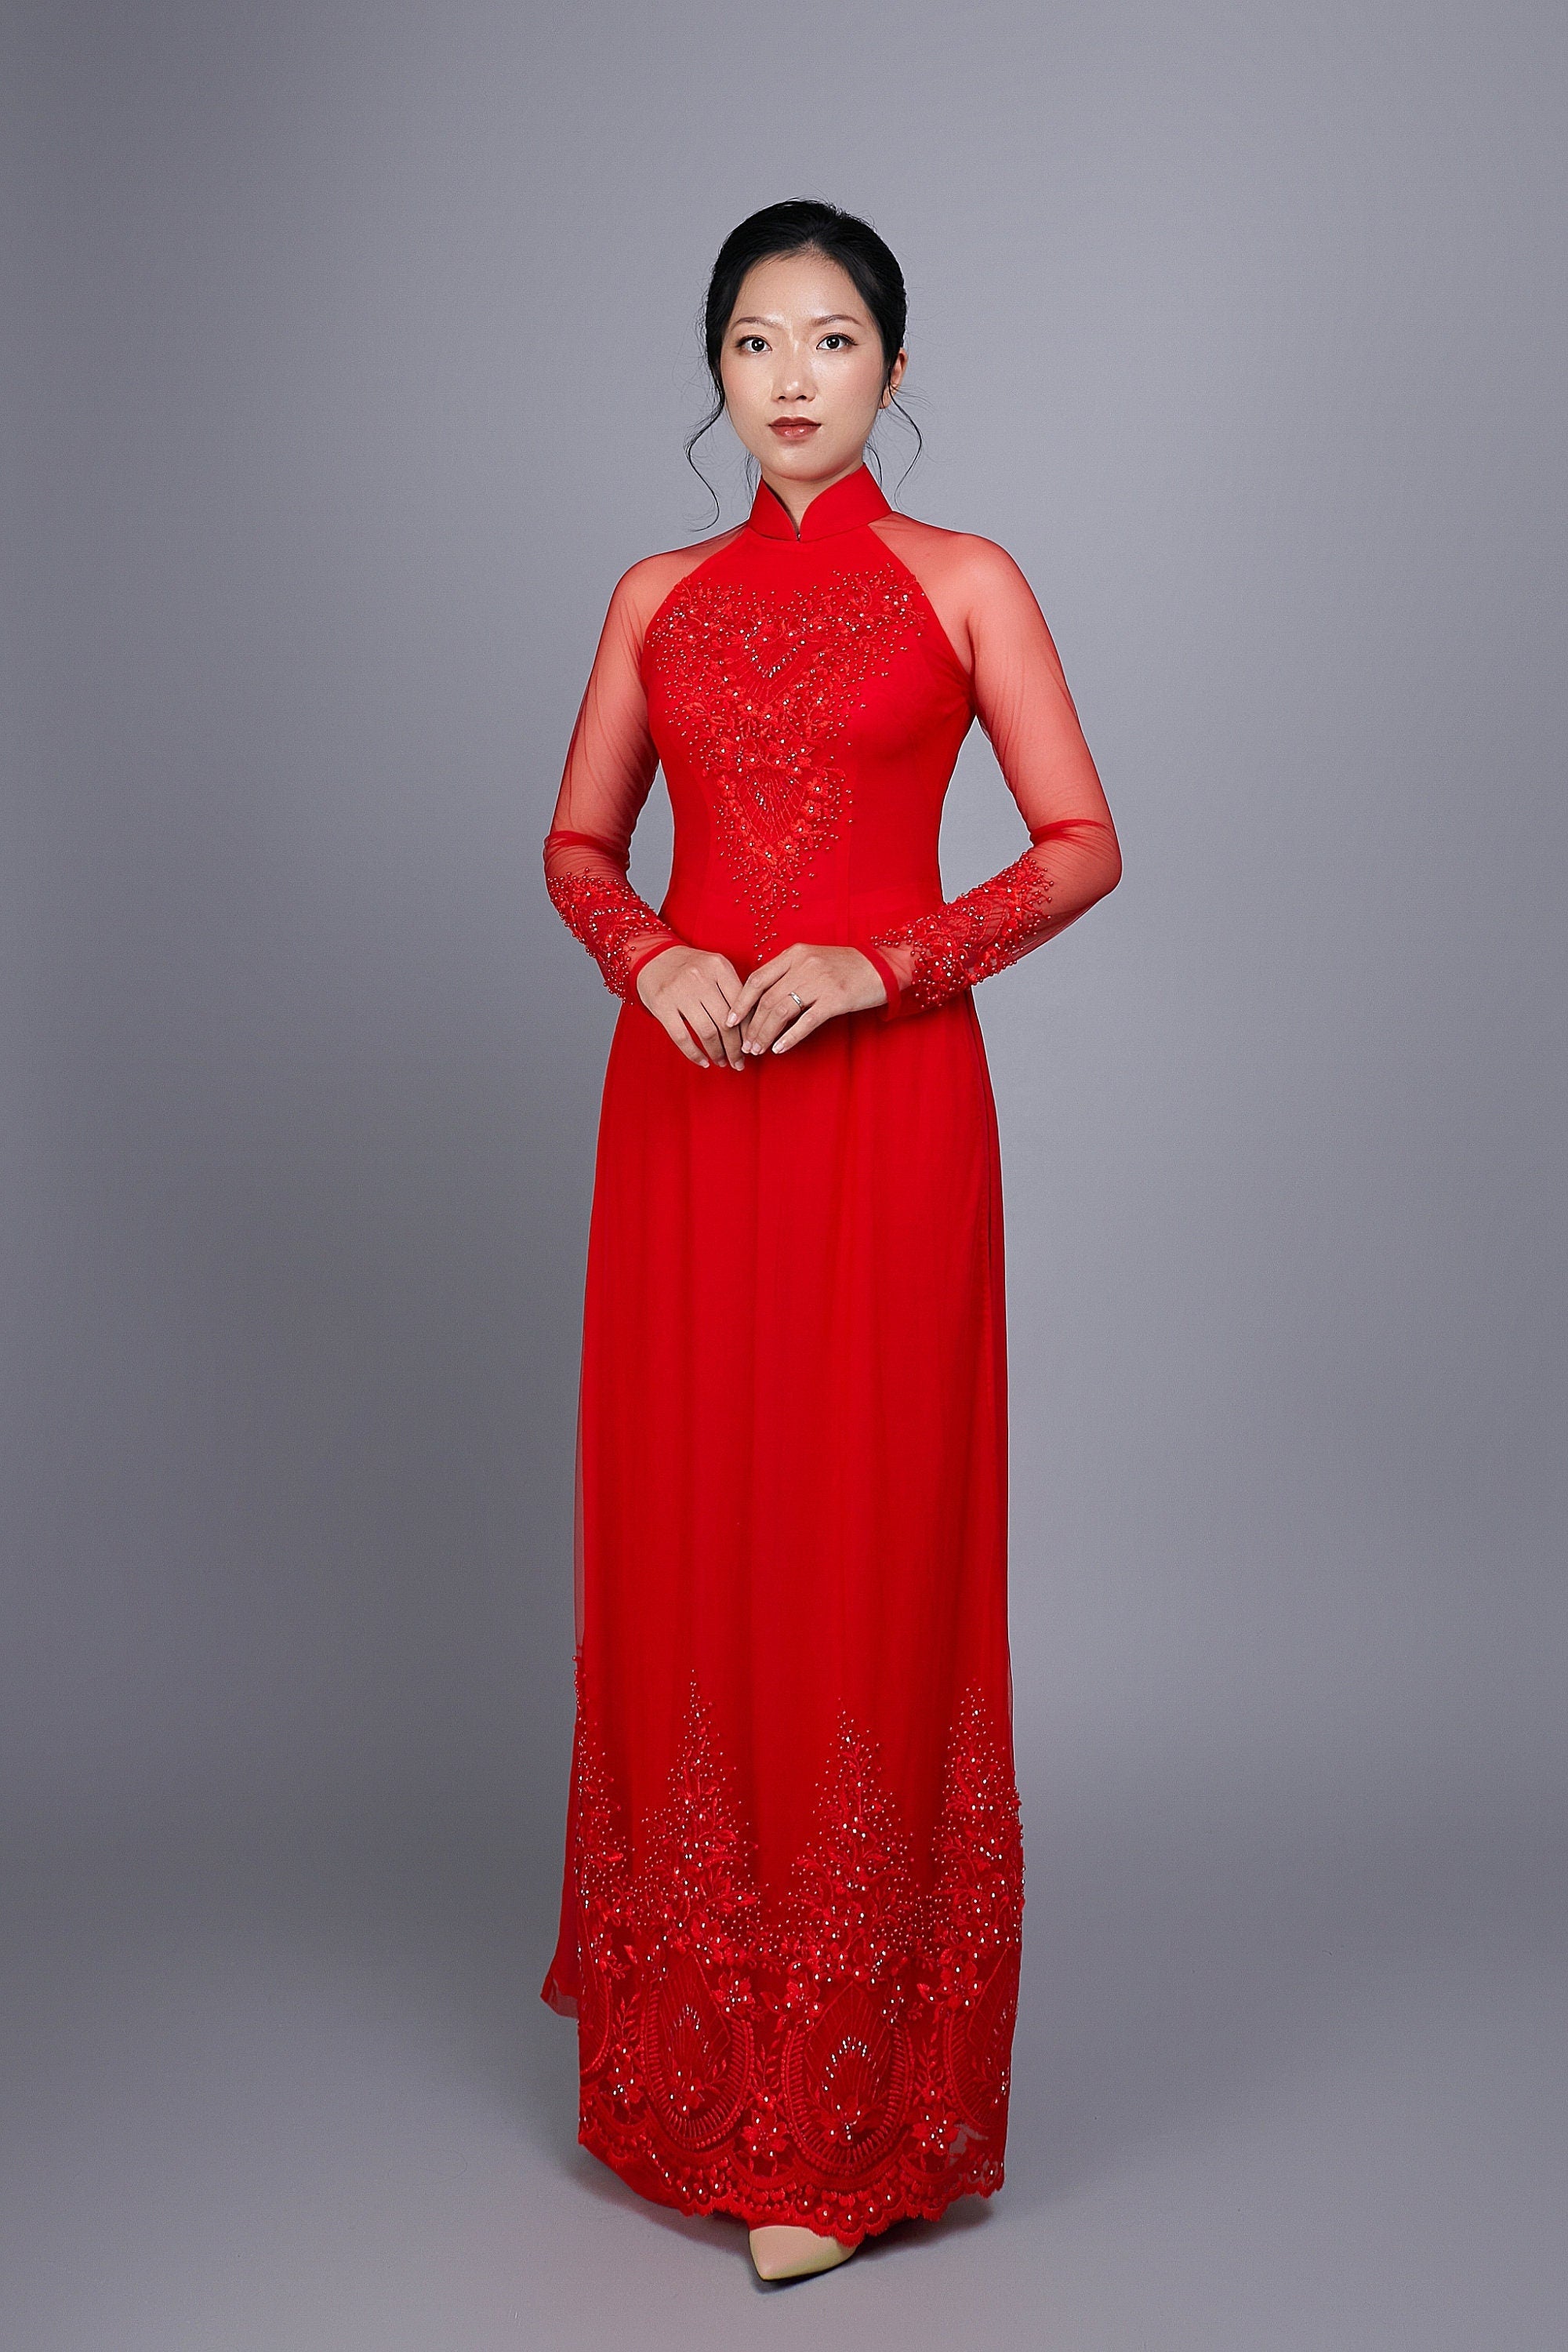 Only Sample Remaining ~ US size 6 - Wedding ao dai in red chiffon fabric. Features beautiful hand beading.